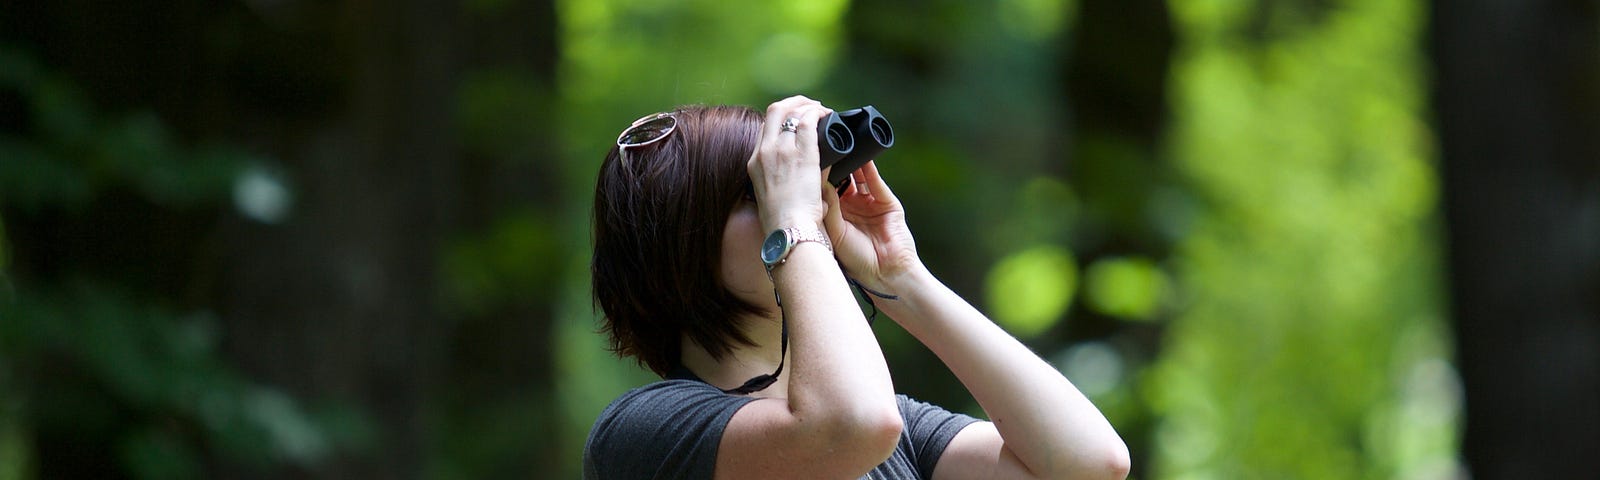 Woman in a forest looking up at trees with binoculars.